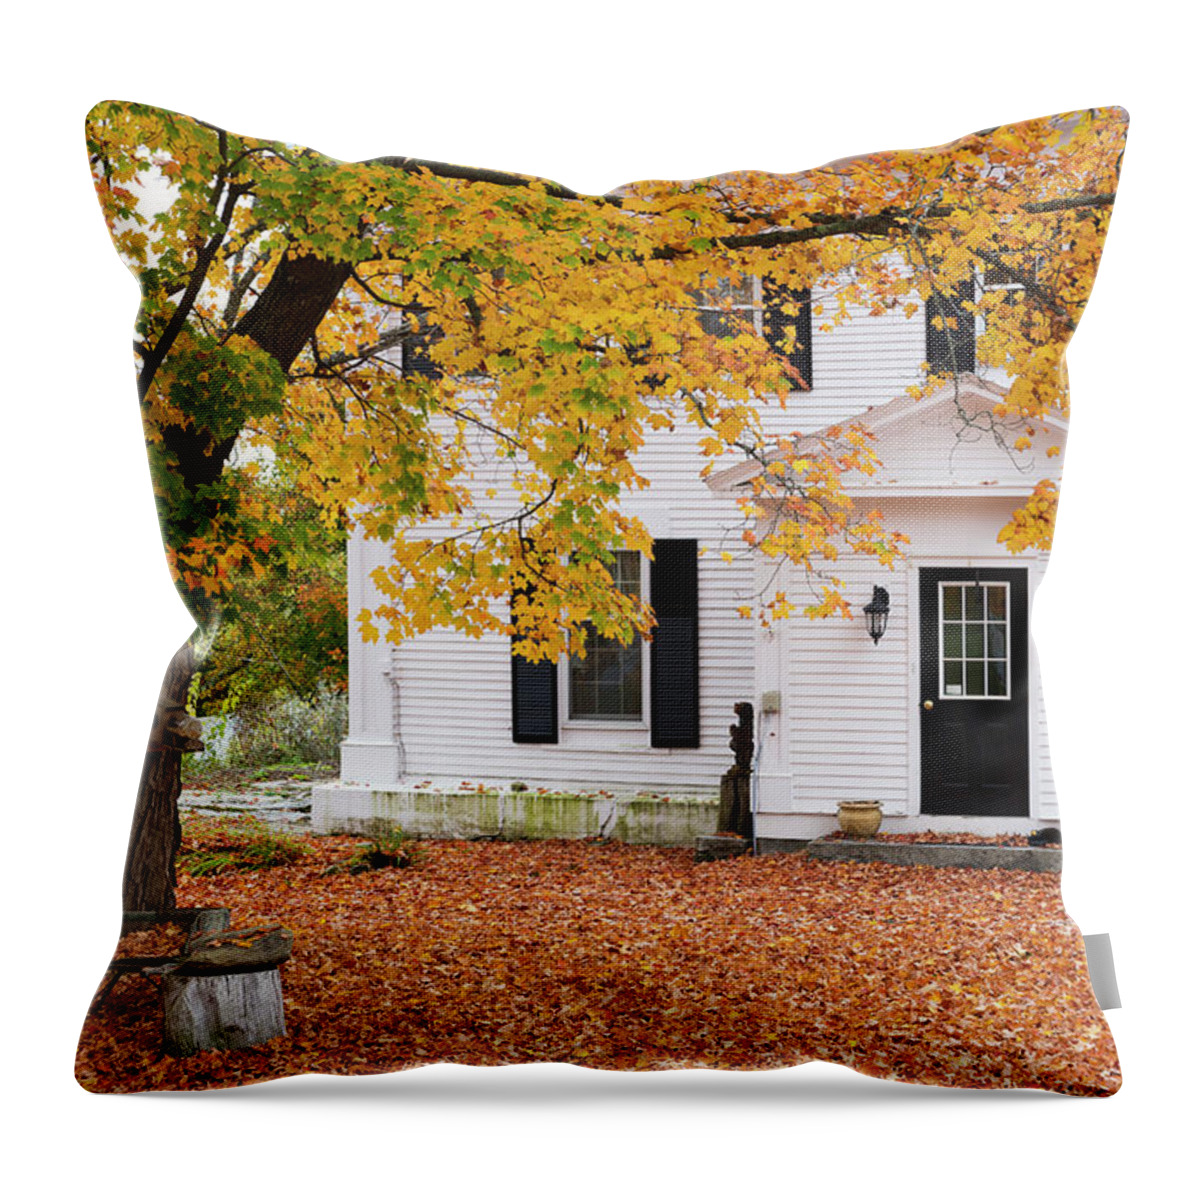 Estock Throw Pillow featuring the digital art House & Tree In Autumn Colors by Tim Mannakee